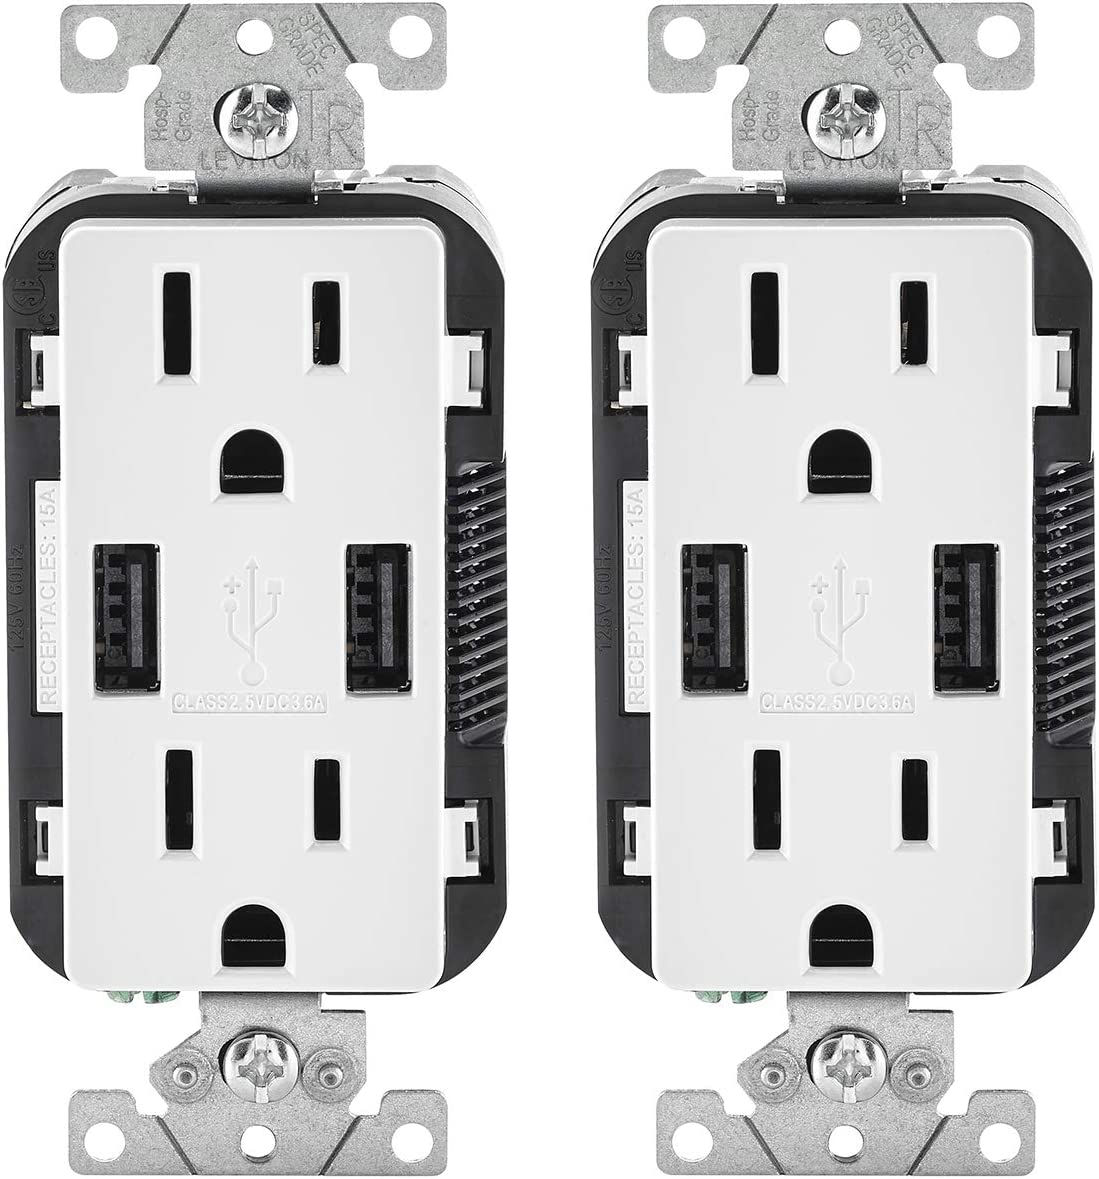 Leviton T5632-2PK USB Type A/A Decora Receptacle 15A 2-Pack in White